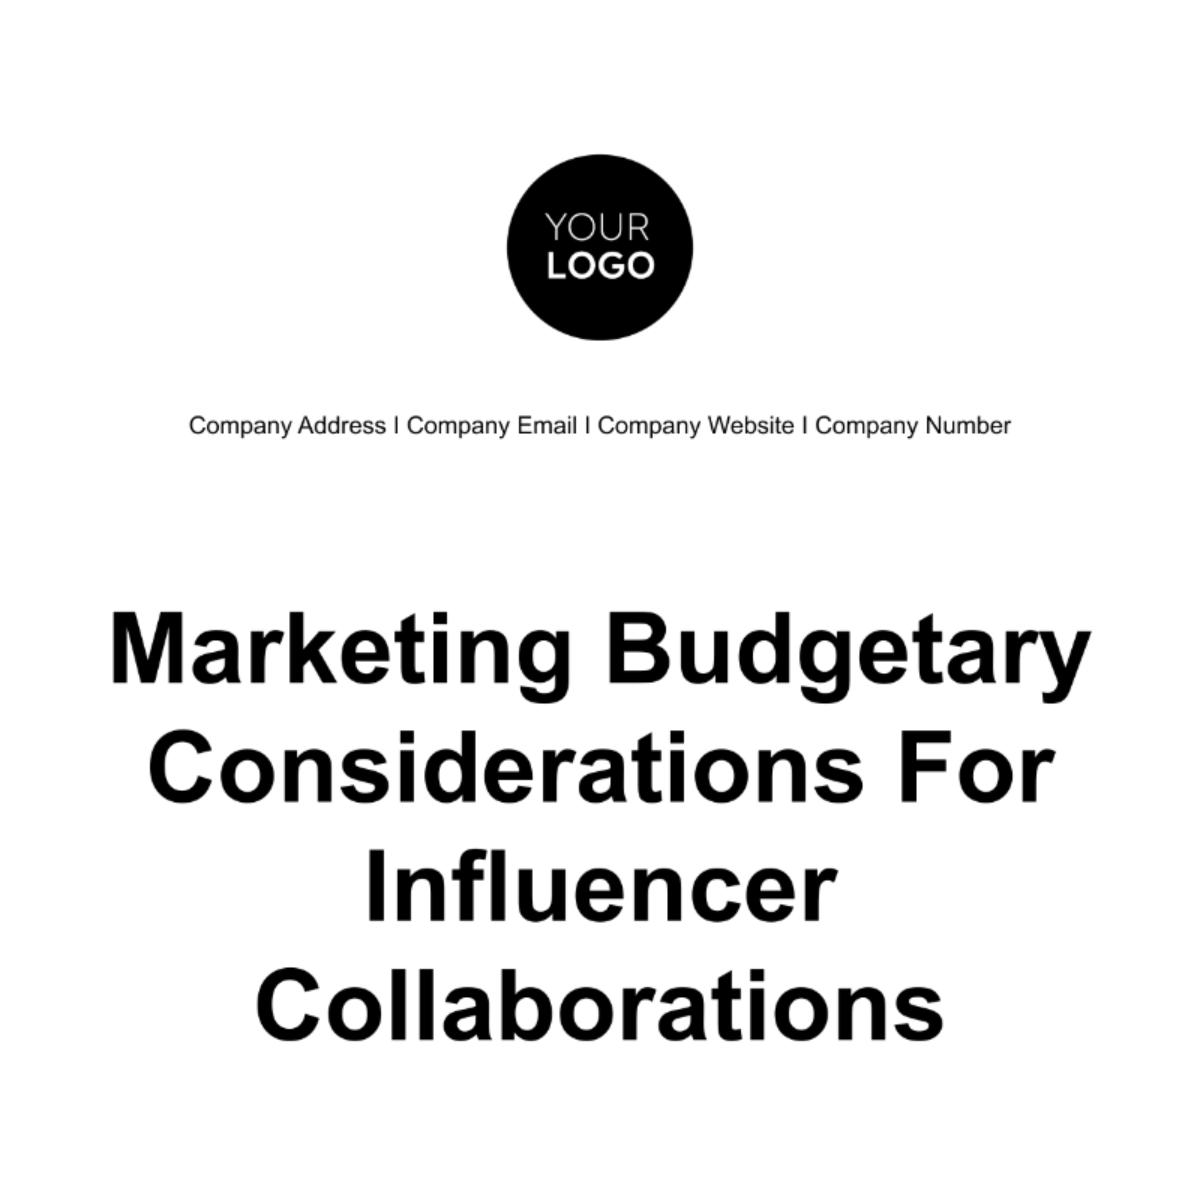 Marketing Budgetary Considerations for Influencer Collaborations Template